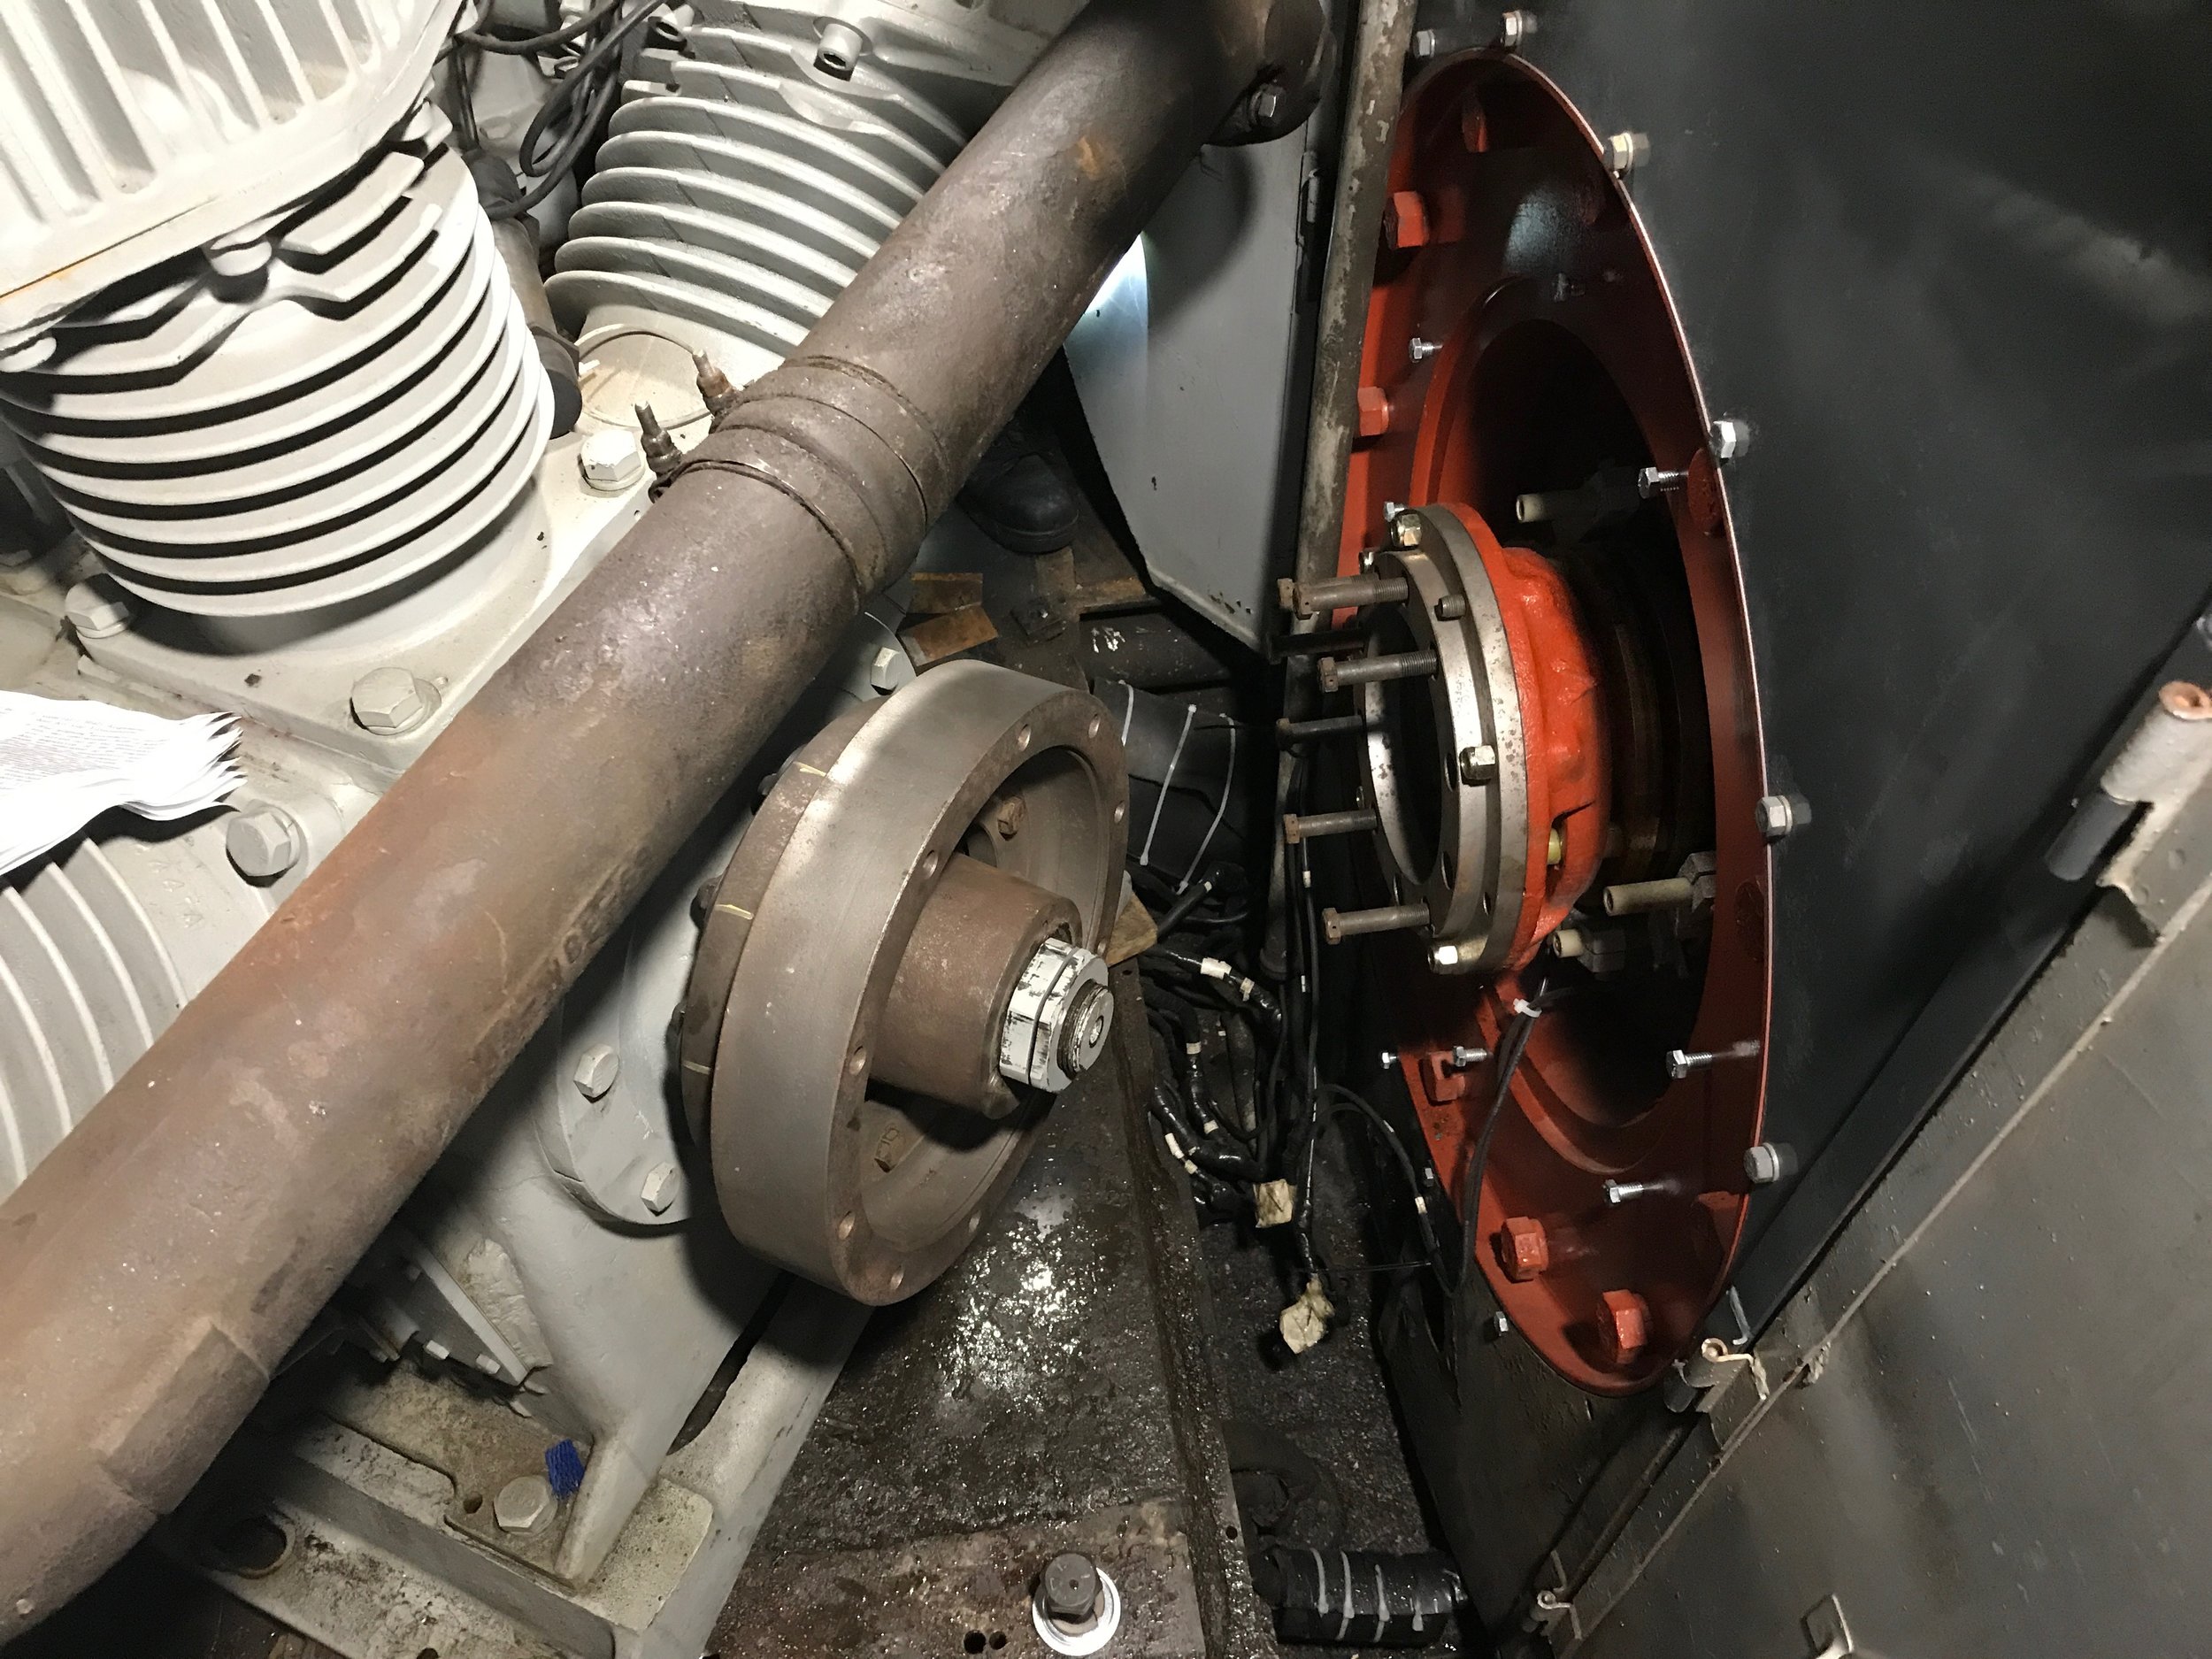  The new compressor coupling, shown on the left, was custom designed by the Santa Fe to withstand the forces put on the linkage between these to major parts while the locomotive is in motion. This was was taken from a derelict Santa Fe CF7 and was re